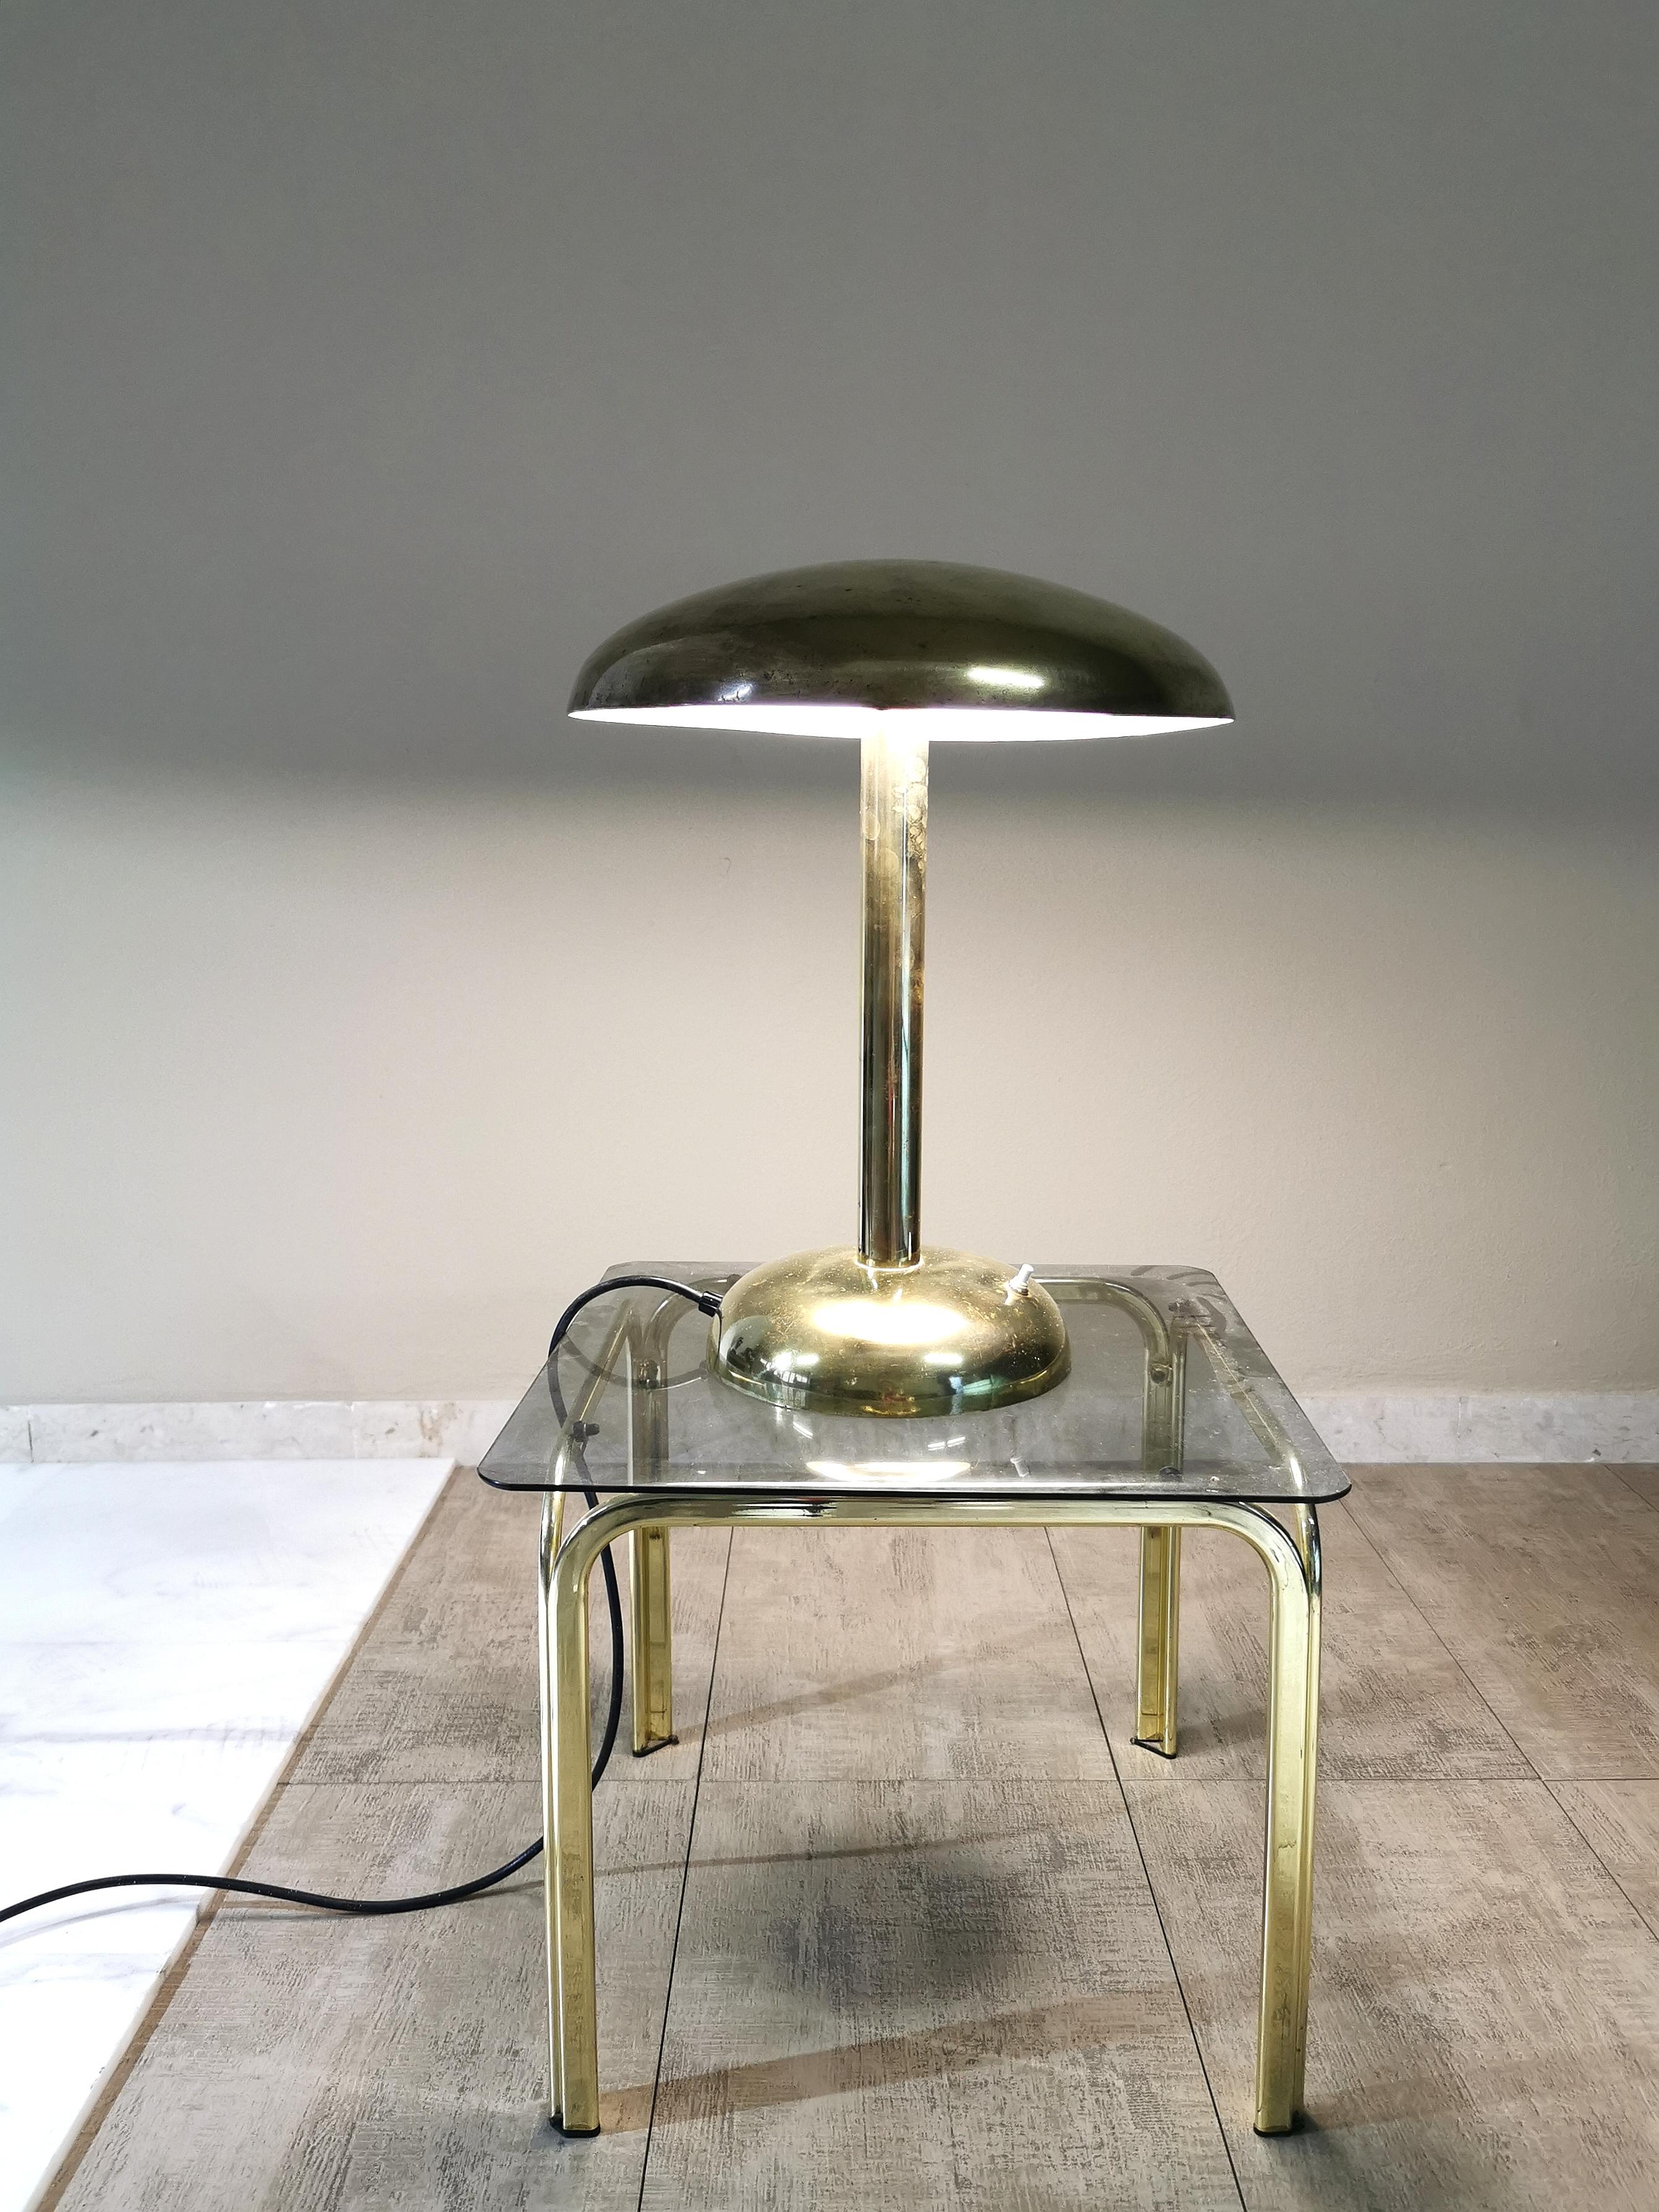 Midcentury table lamp completely in brass with 1 fluorescent light, 1940s, Italian production.